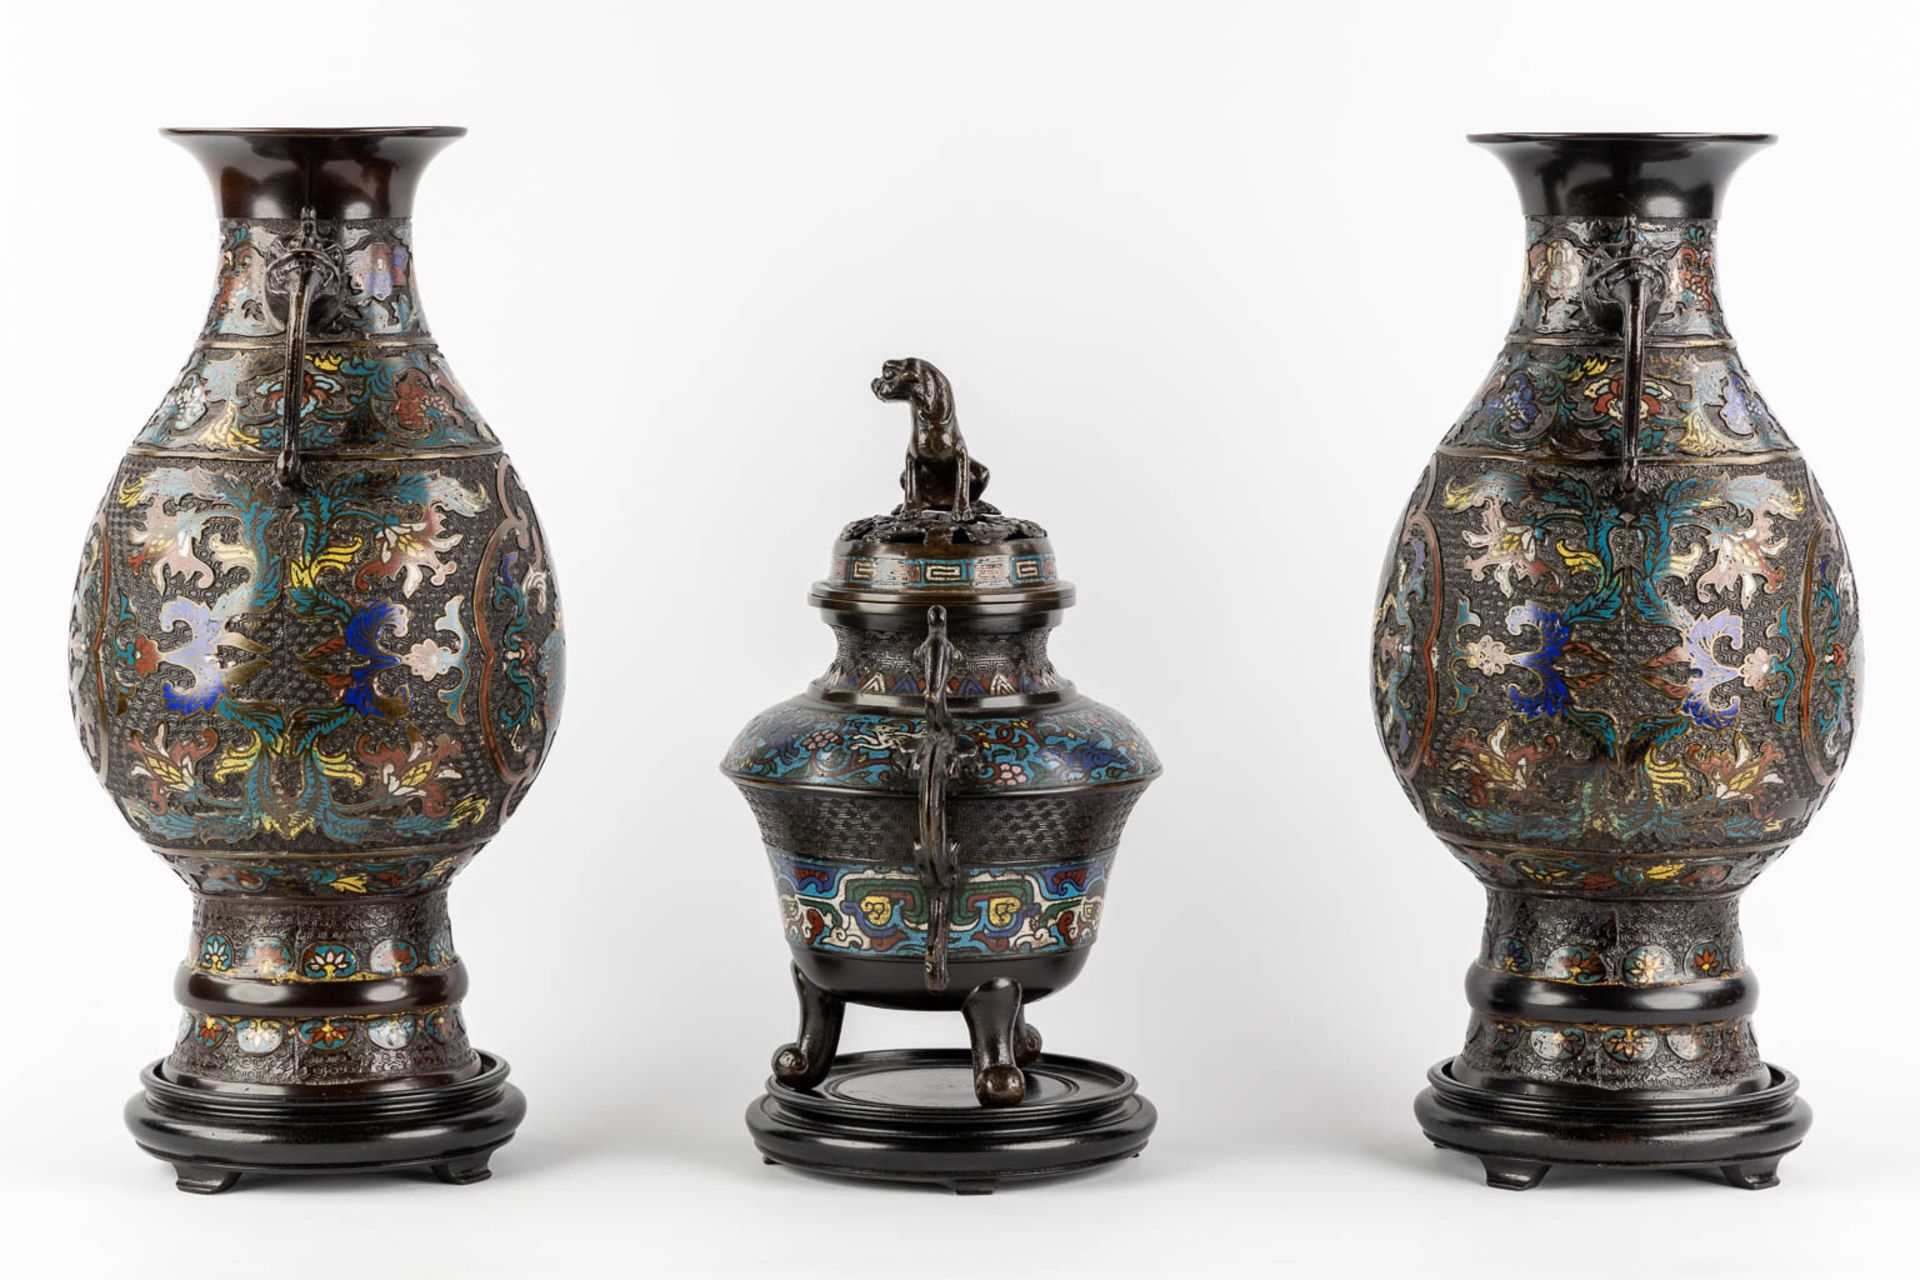 A pair of vases, added an insence burner, bronze with champslevé decor. Circa 1900. (H:45 x D:23 cm) - Image 6 of 15